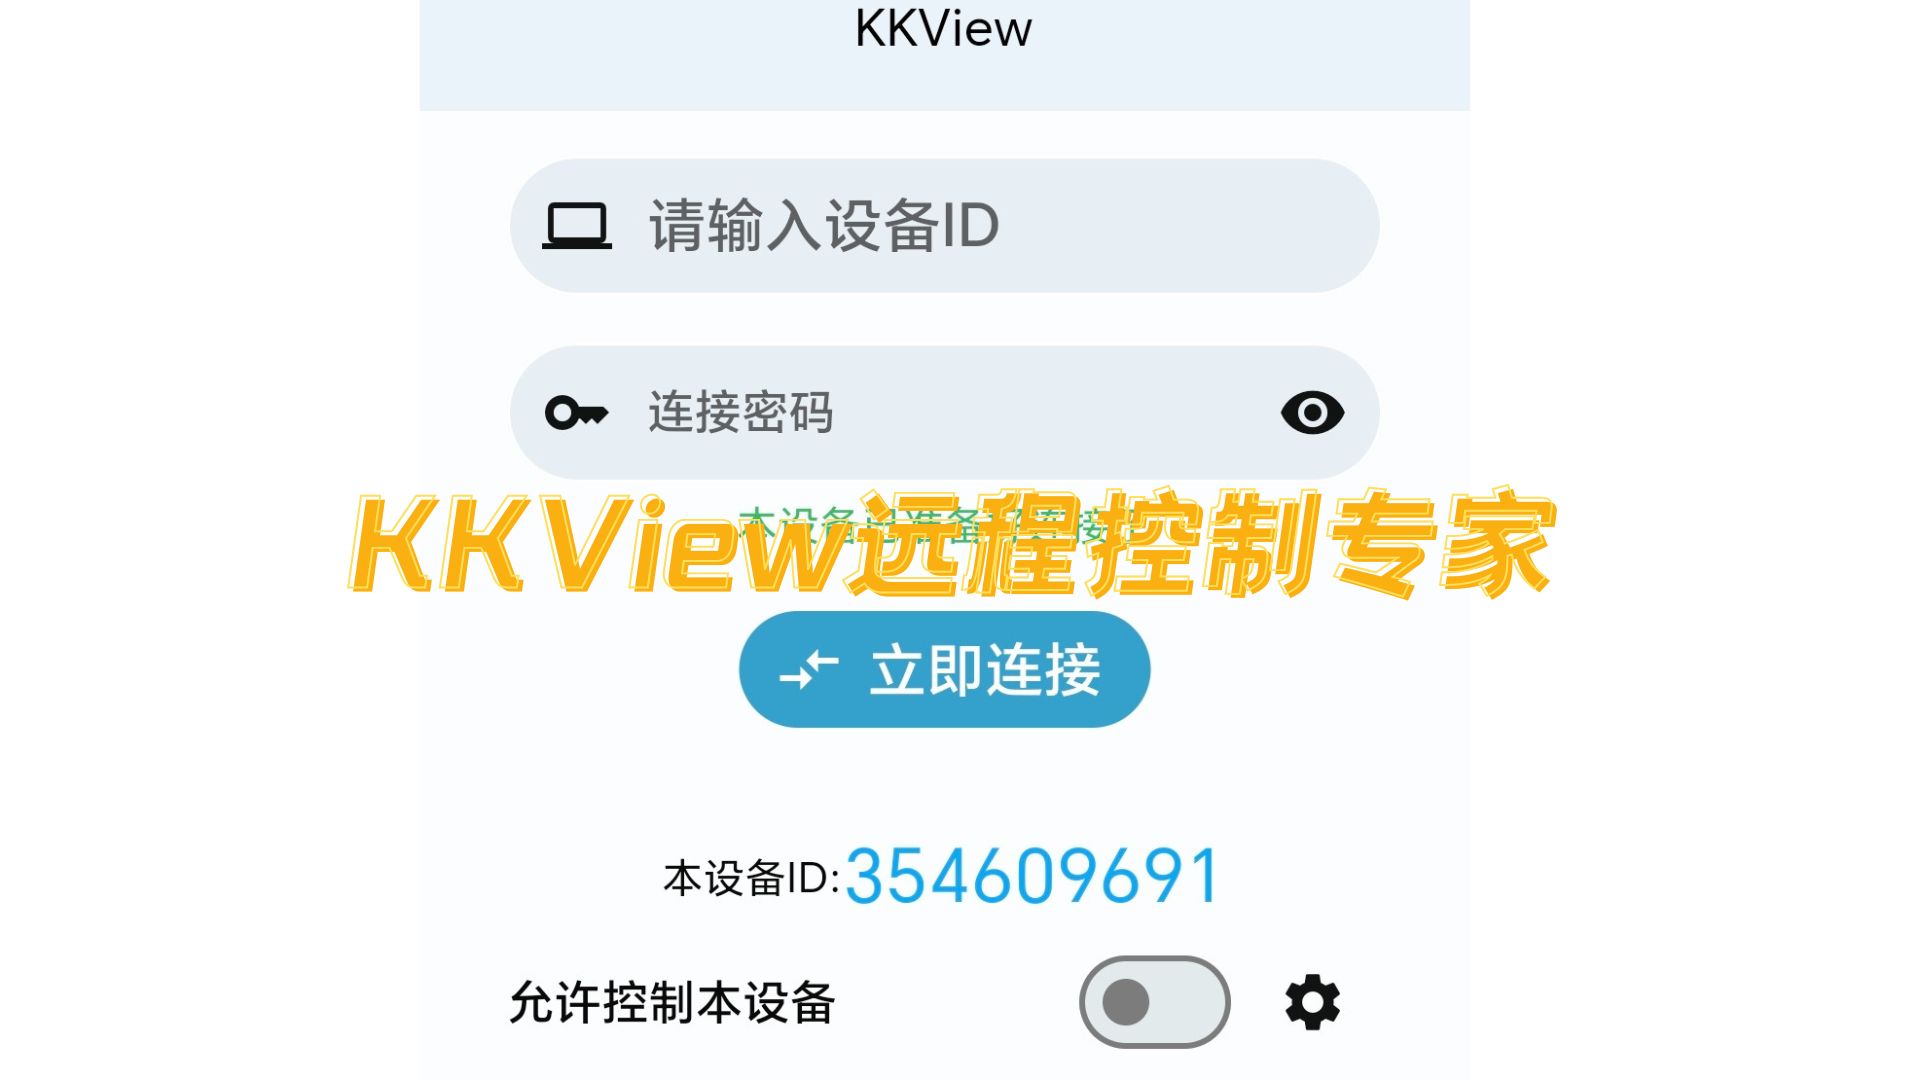 KKVIEW<span style='color:red;'>远程</span>: <span style='color:red;'>安</span><span style='color:red;'>卓</span>免费<span style='color:red;'>远程</span><span style='color:red;'>控制</span>软件